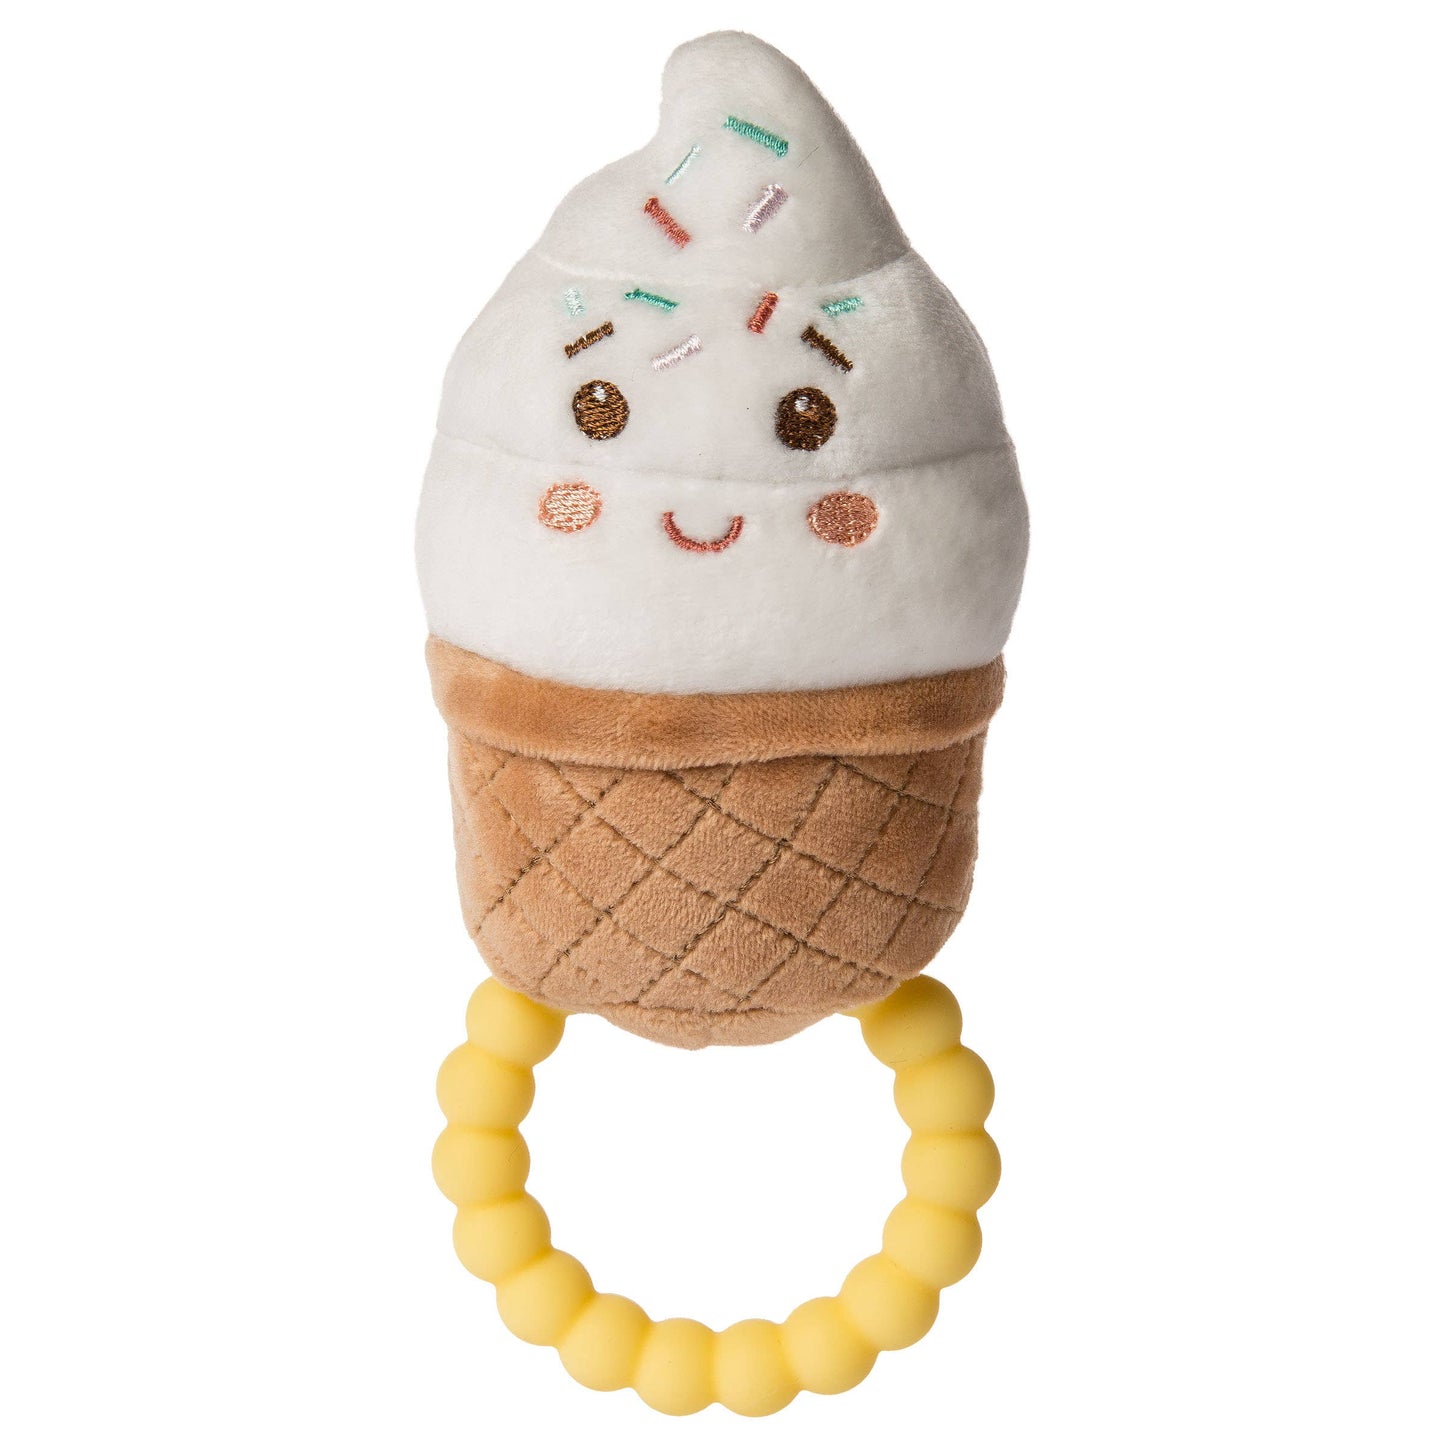 Sweet Soothie Sprinkly Ice Cream Teether Rattle